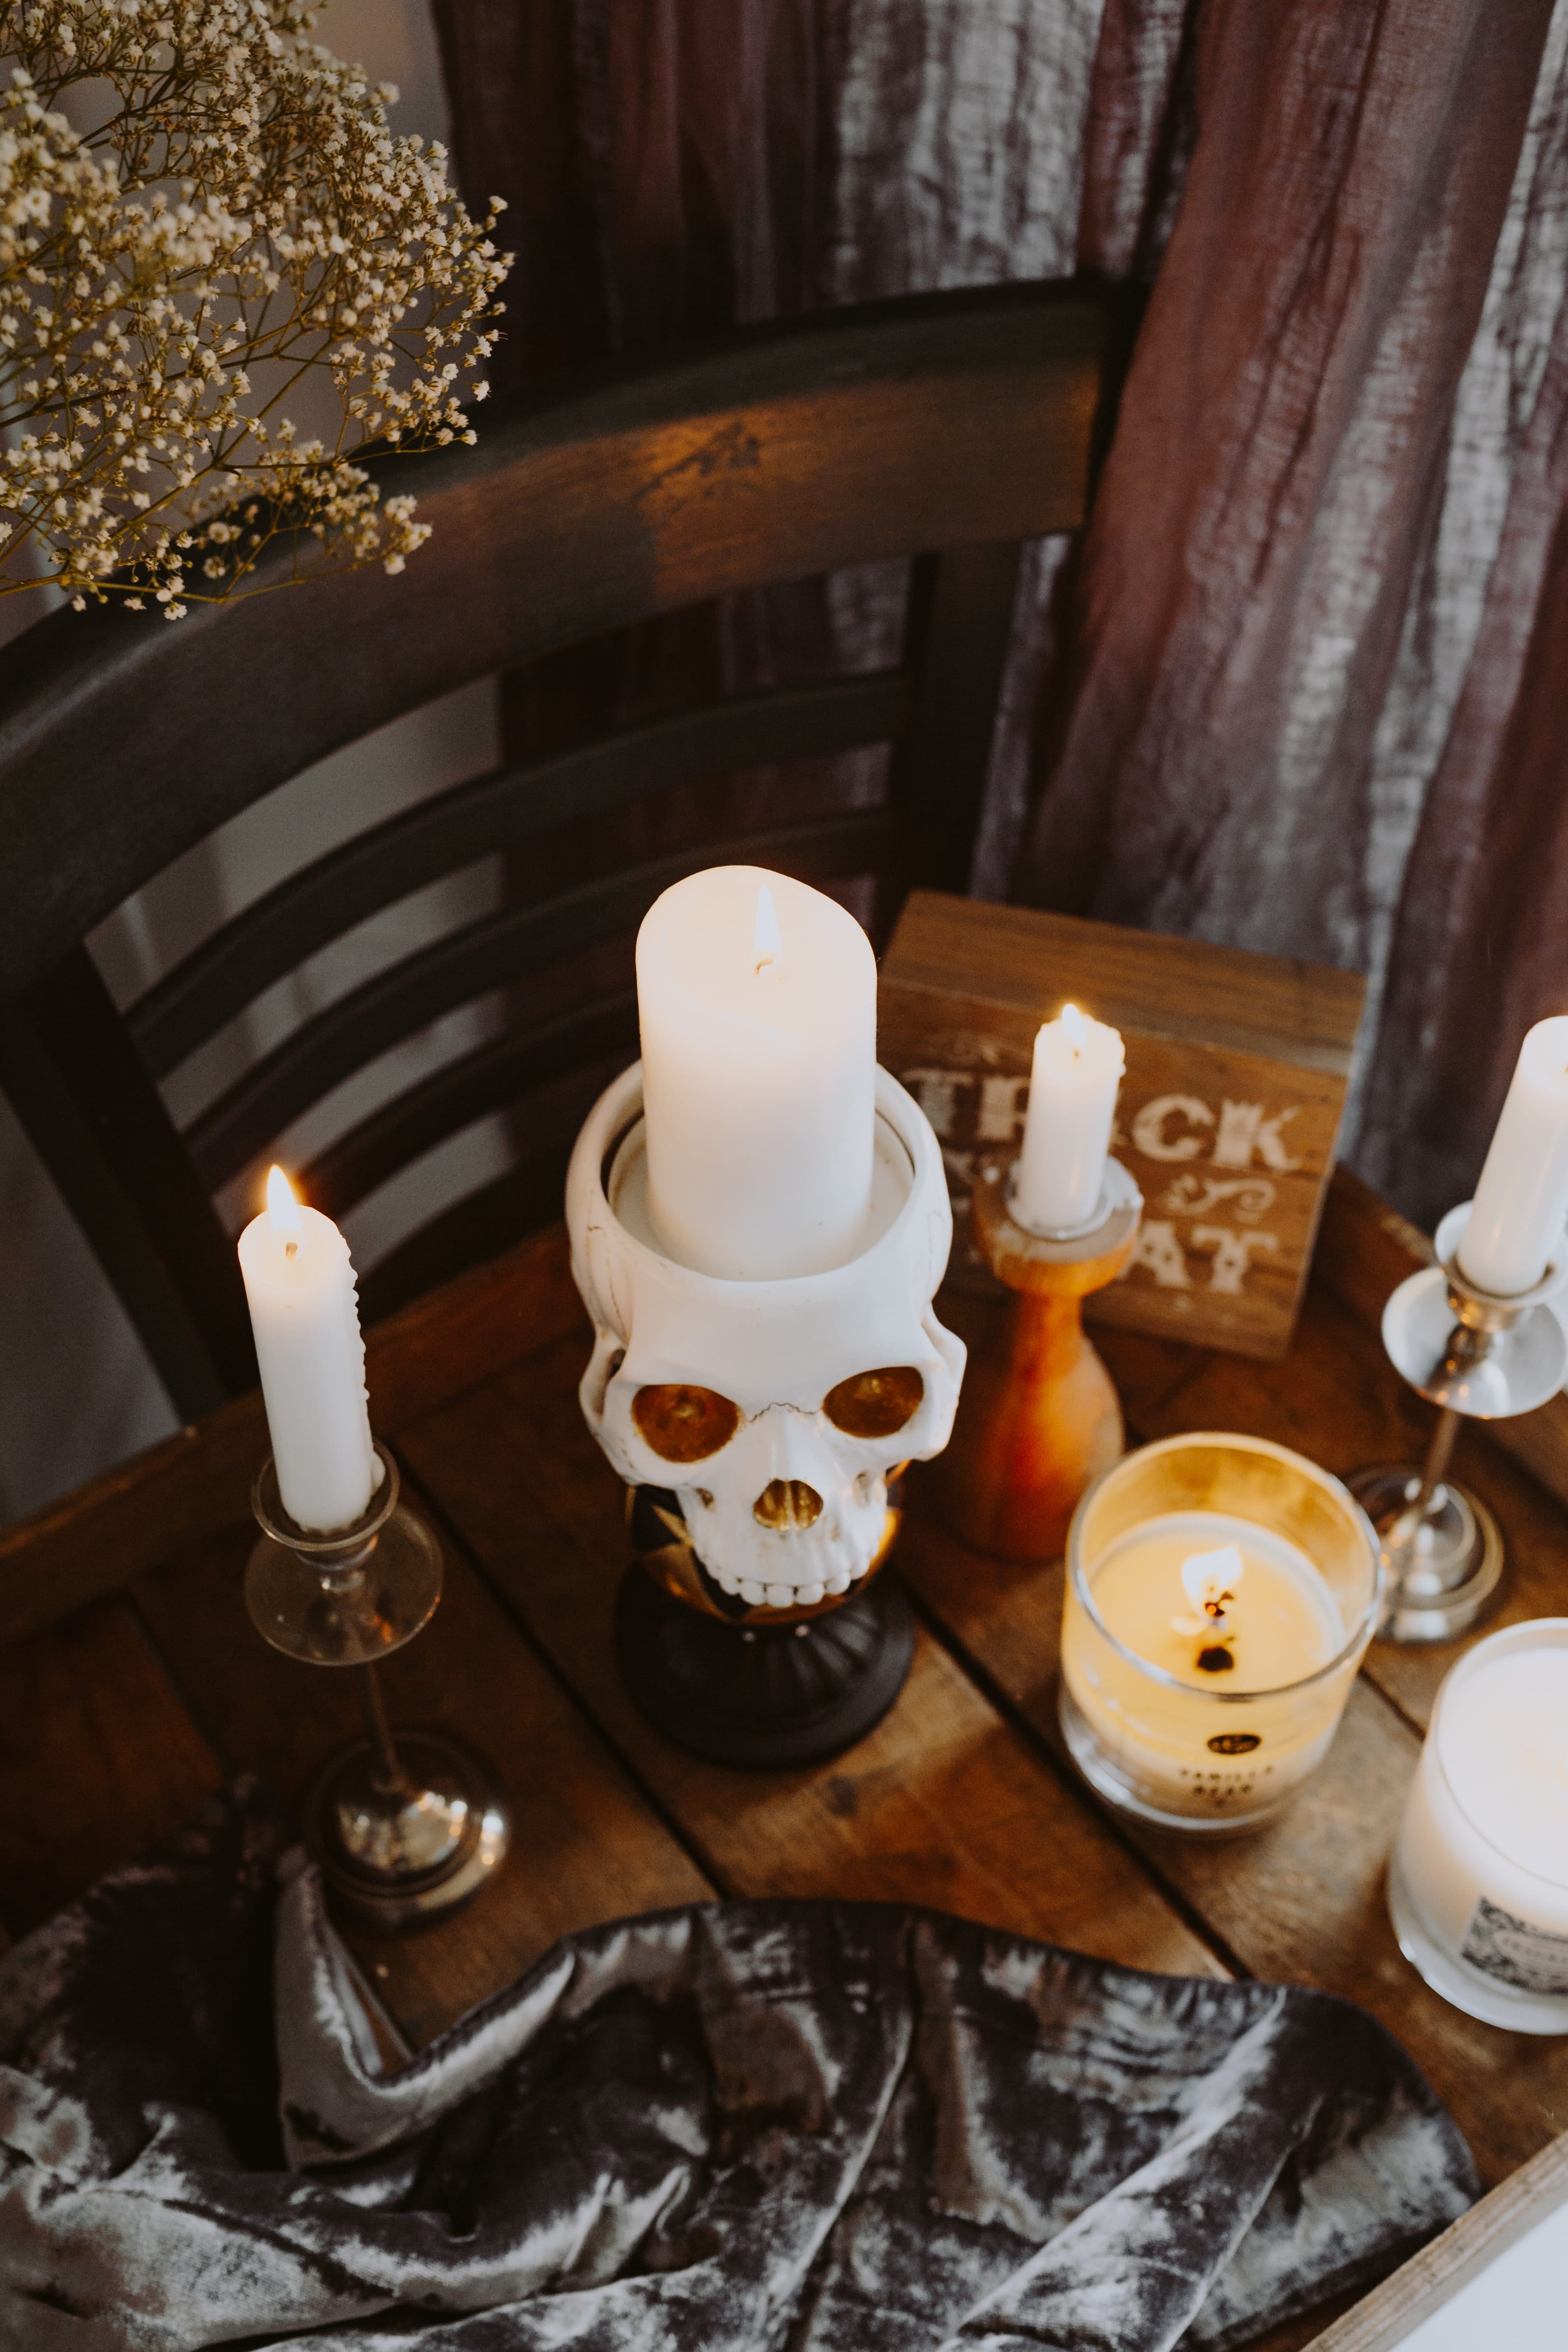 Free download | HD wallpaper: Halloween Decorations & Candles, autumn ...